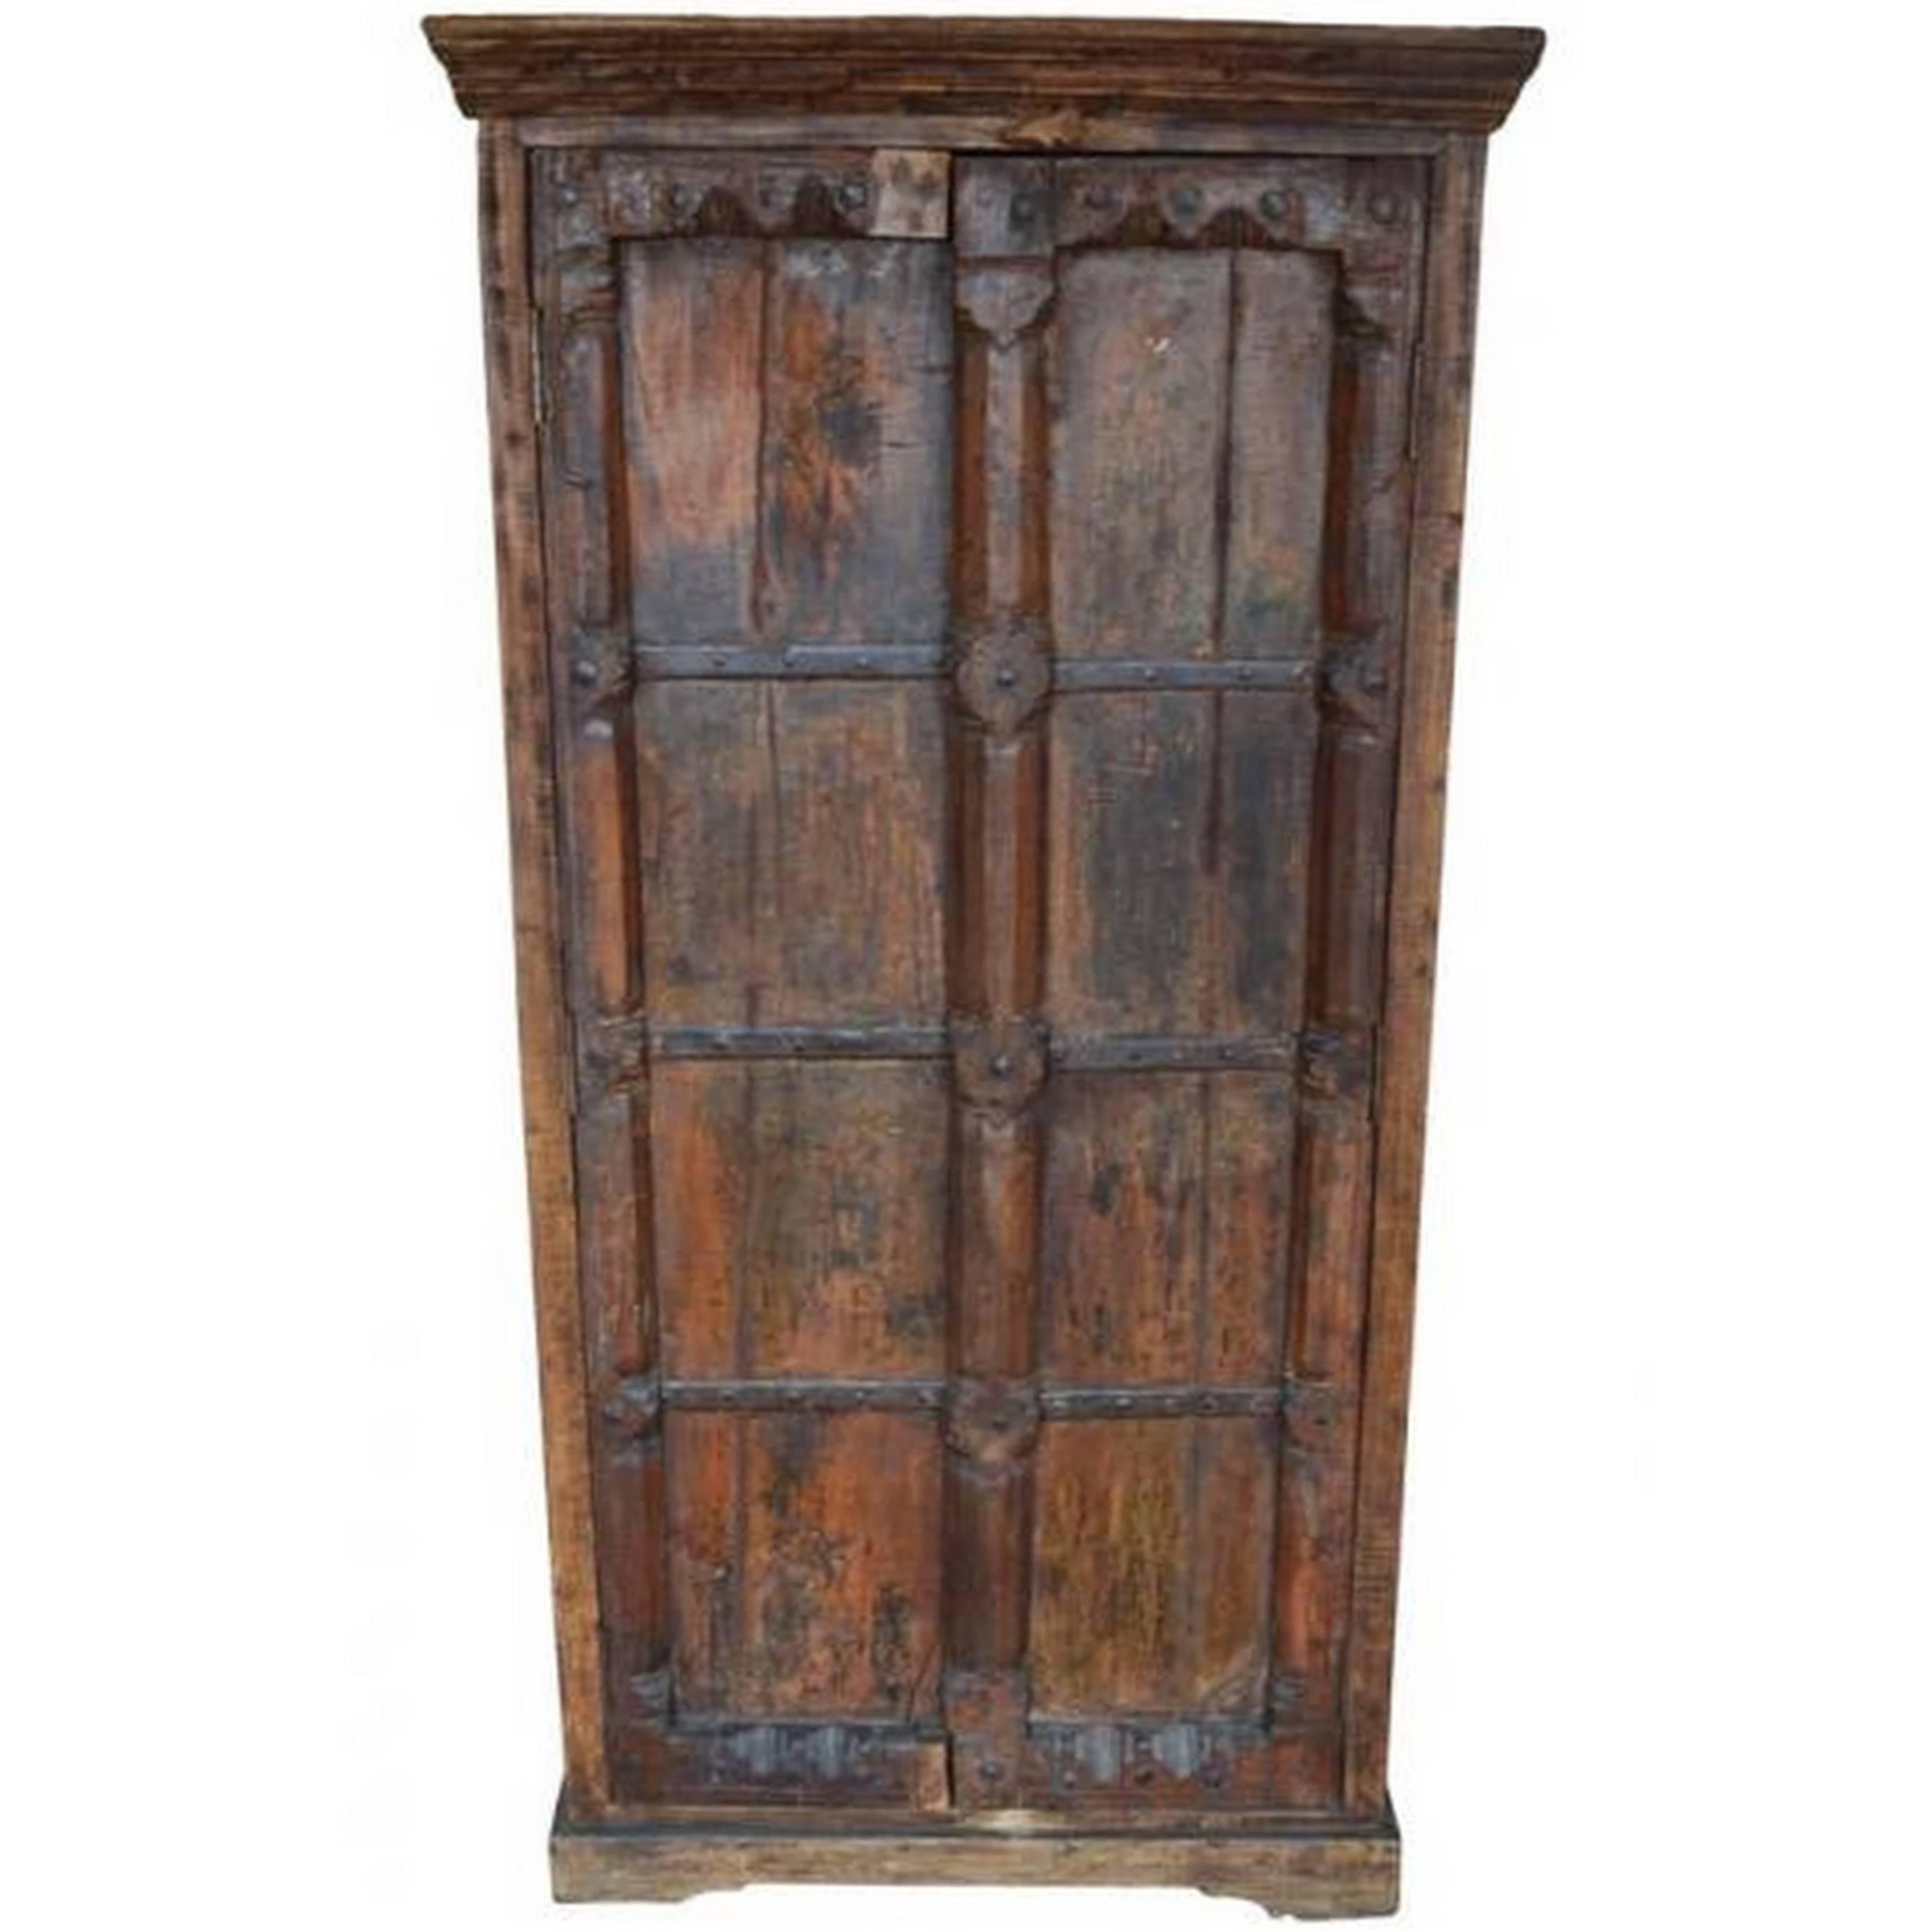 Indian Hand-Carved Wood Cabinet with Three Shelves with Floral Motifs